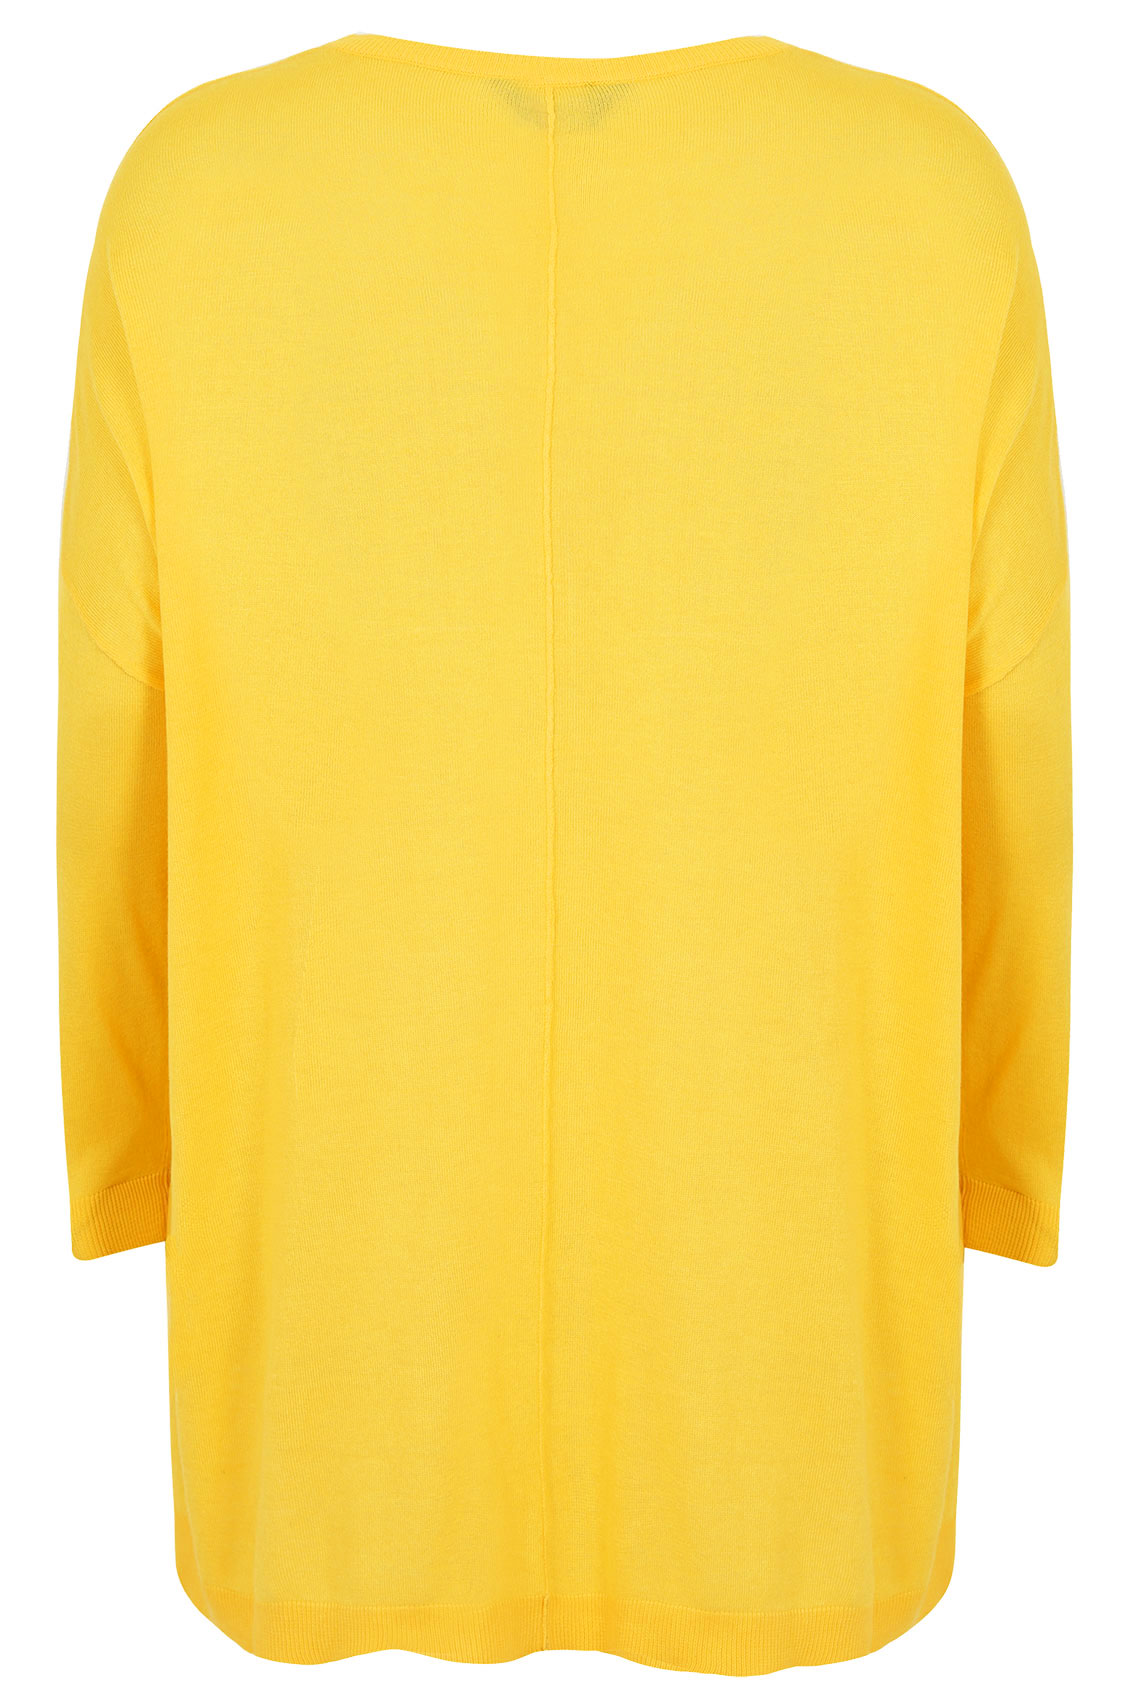 Yellow Longline Batwing Slouch Jumper With Side Slits Plus Size 14 to 32